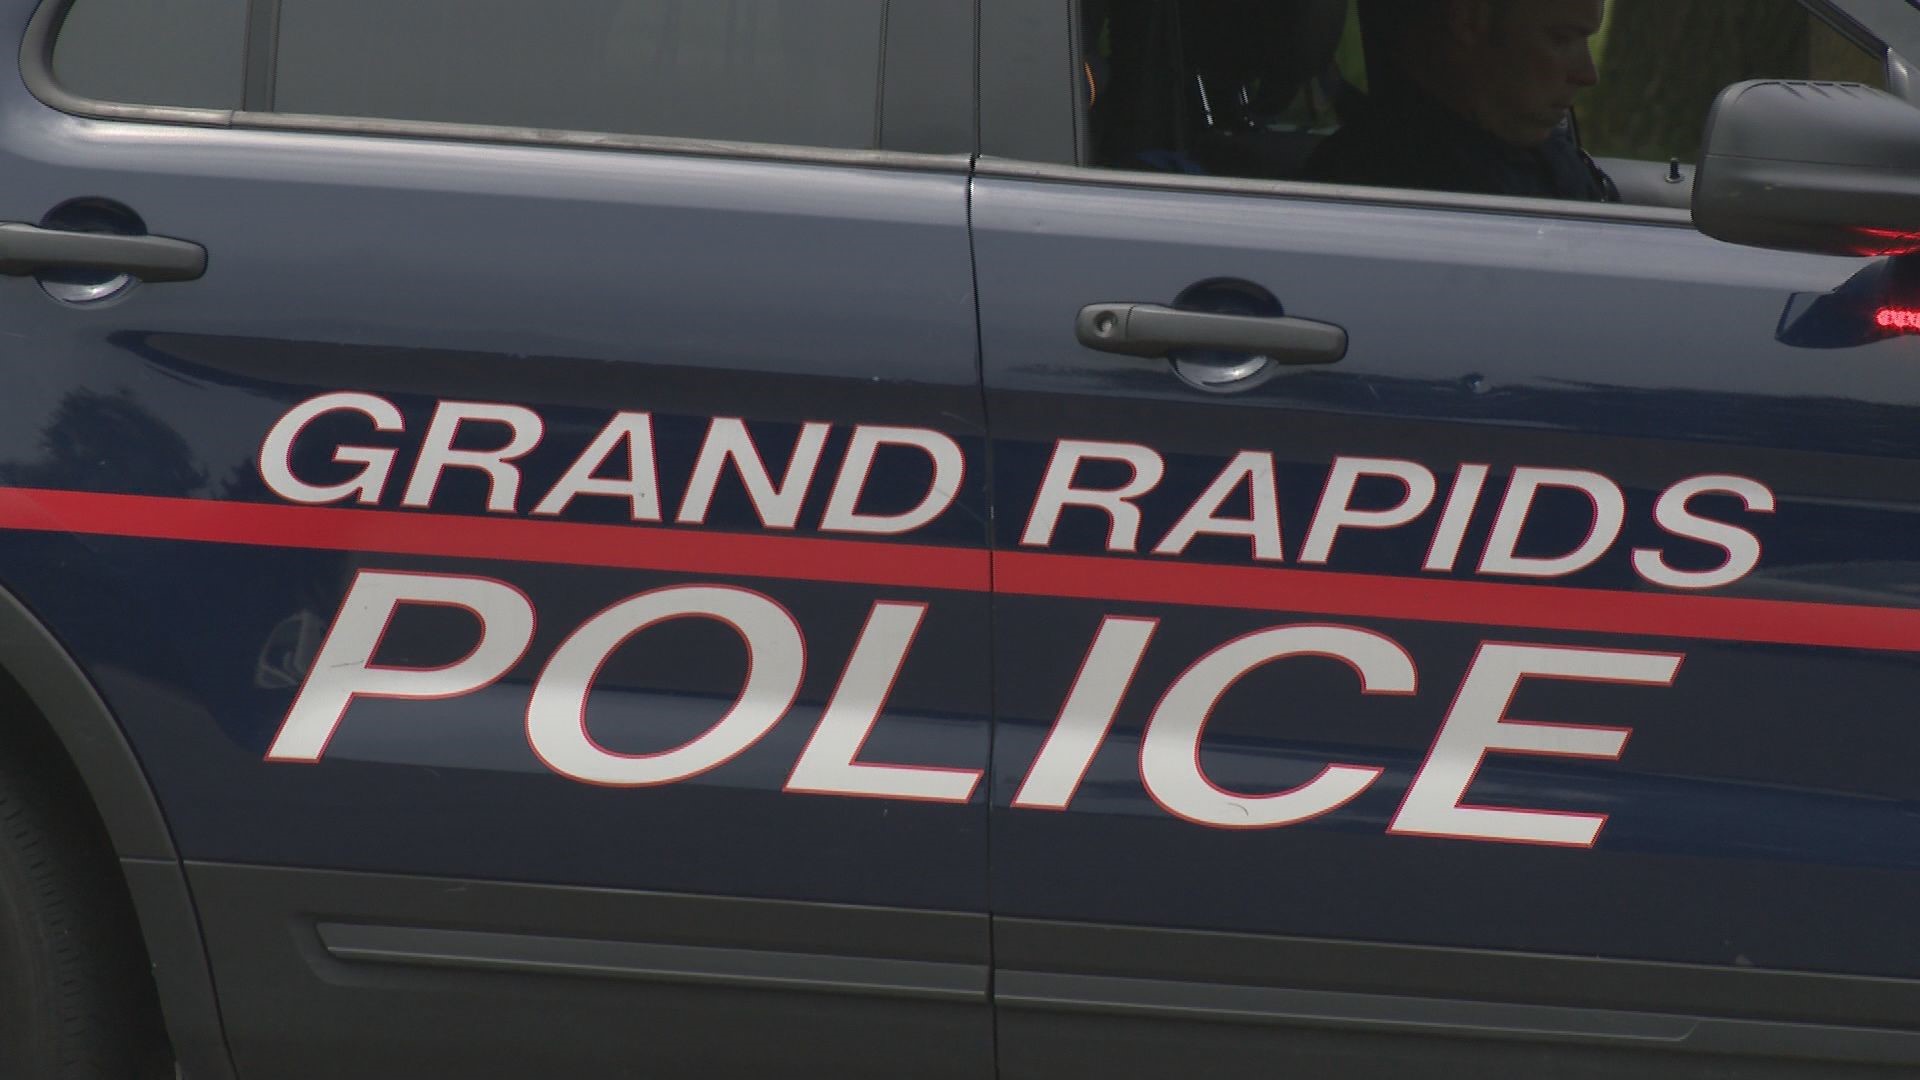 A 16-year-old is dead after a shooting in Grand Rapids in the early hours of New Year's Day, the Police Department says.